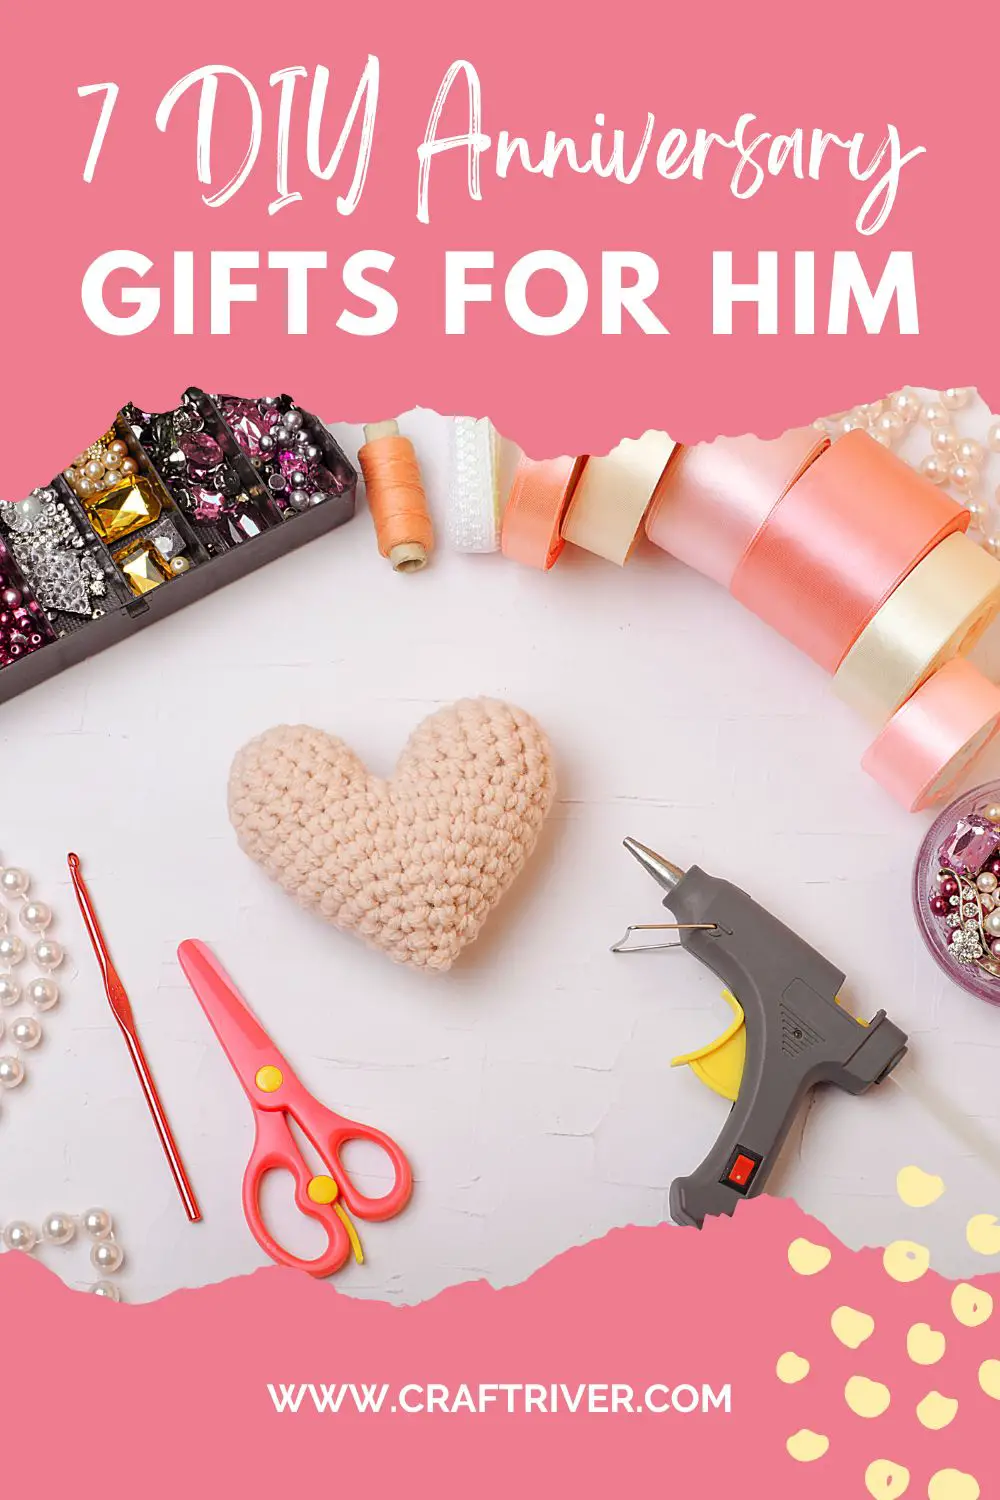 7 DIY Anniversary Gifts for Him That Will Melt His Heart